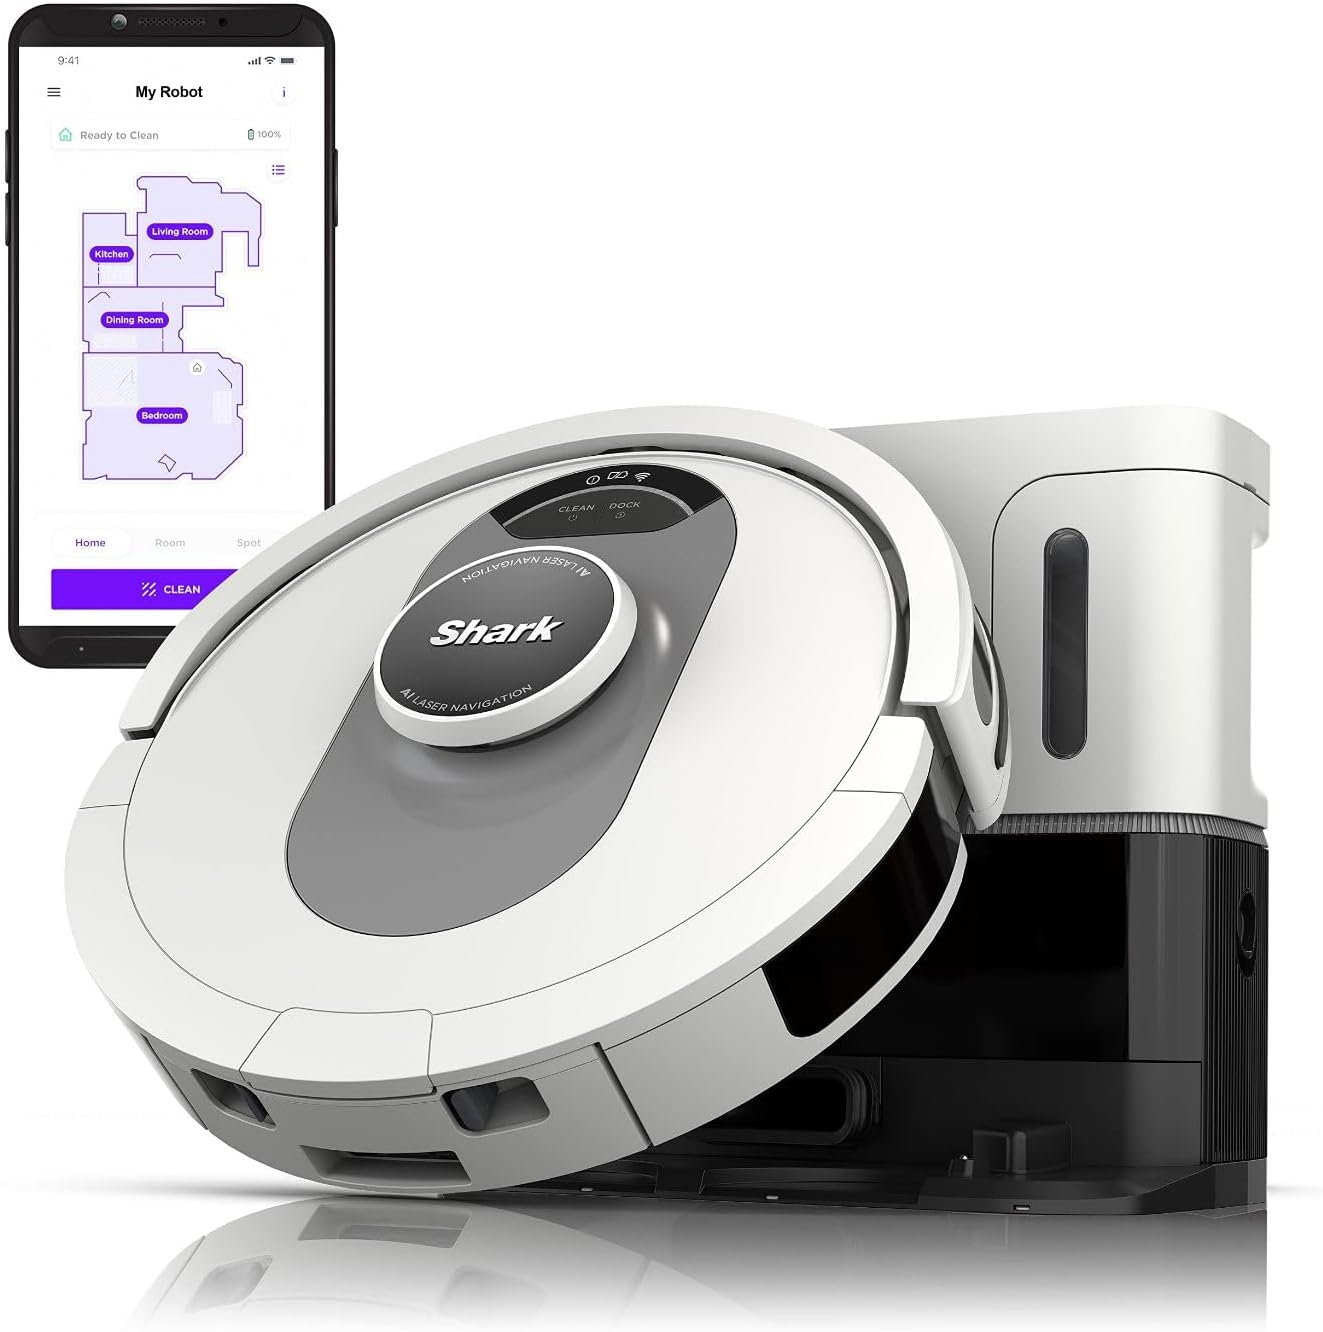 Shark AI Ultra Self-Empty Robot Vacuum, Bagless 60-Day Capacity Base, Precision Home Mapping, Perfect for Pet Hair, Wi-Fi, AV2511AE - image 1 of 3